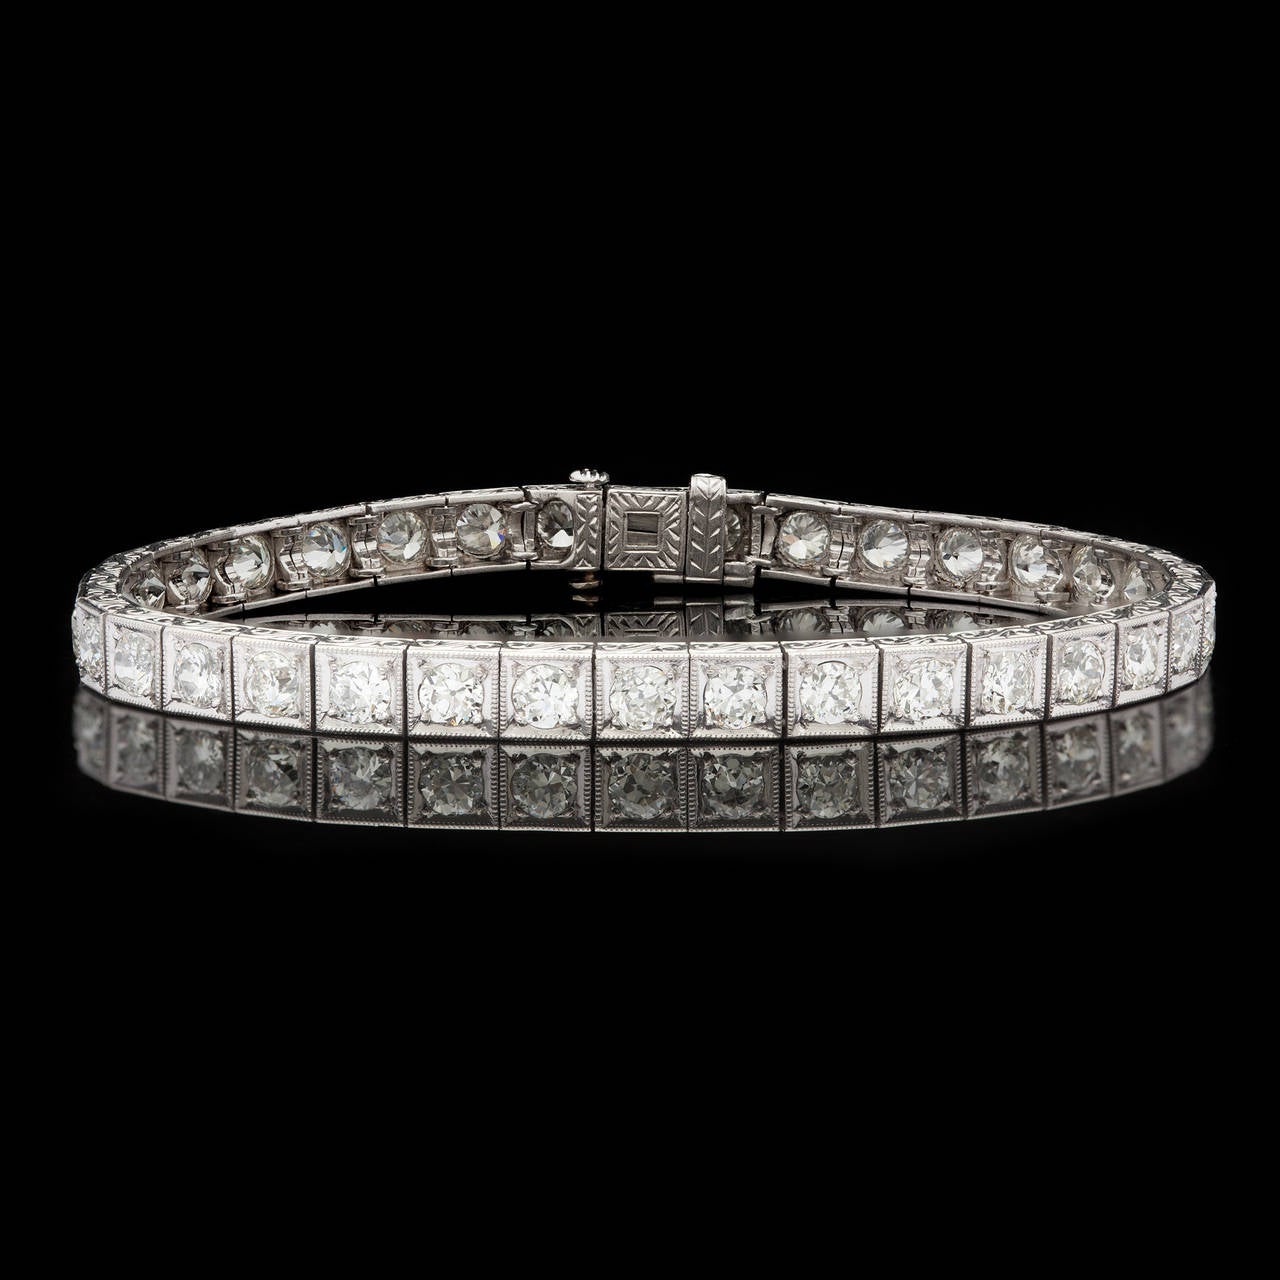 Platinum Art Deco Straight Line Bracelet Features 36 Old European Diamonds set in  engraved and milgrained edged box links. The total diamond weight is approximately 5.76 carats. The bracelet is just over 7.0 inches long and measures 5mm wide. The